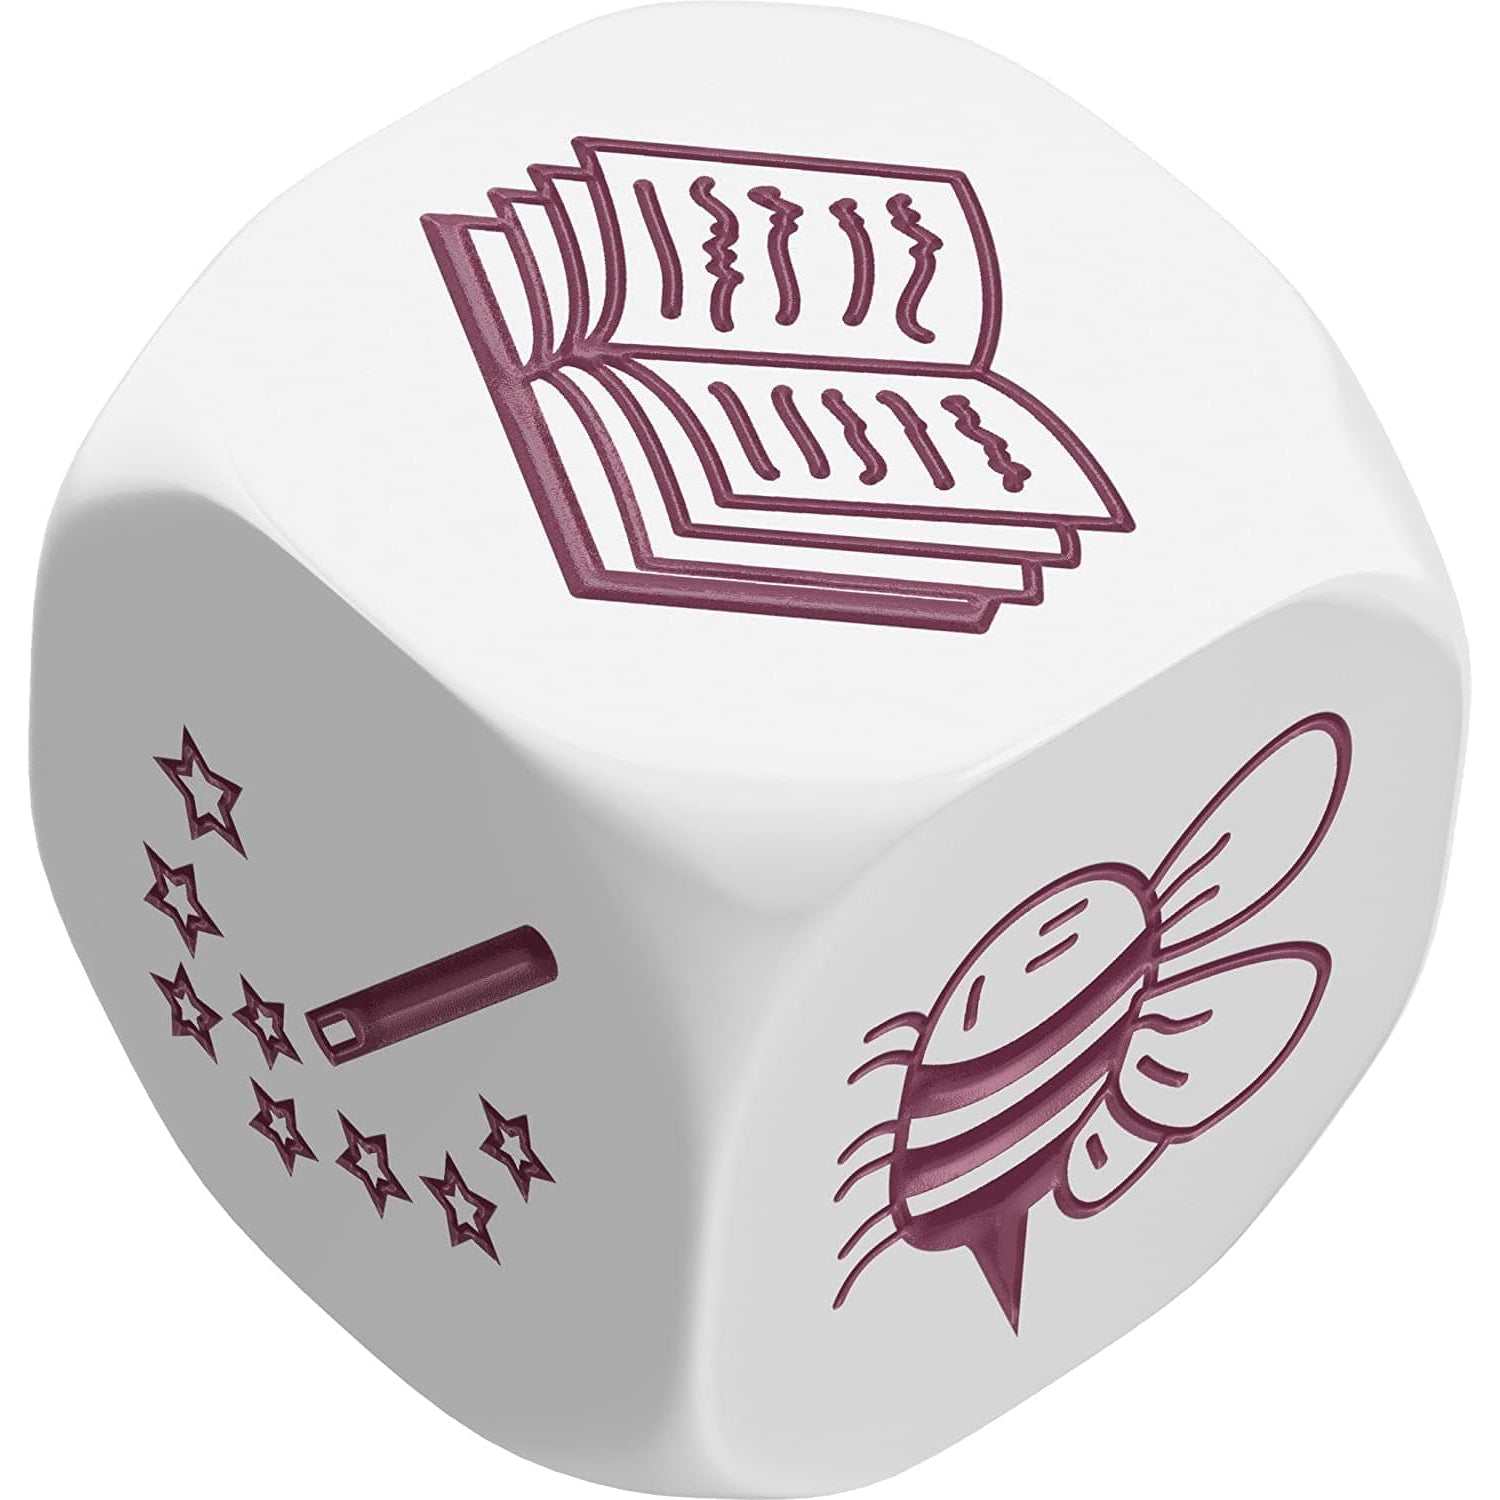 Asmodee-Rory's Story Cubes: Classic-RSC01-Legacy Toys